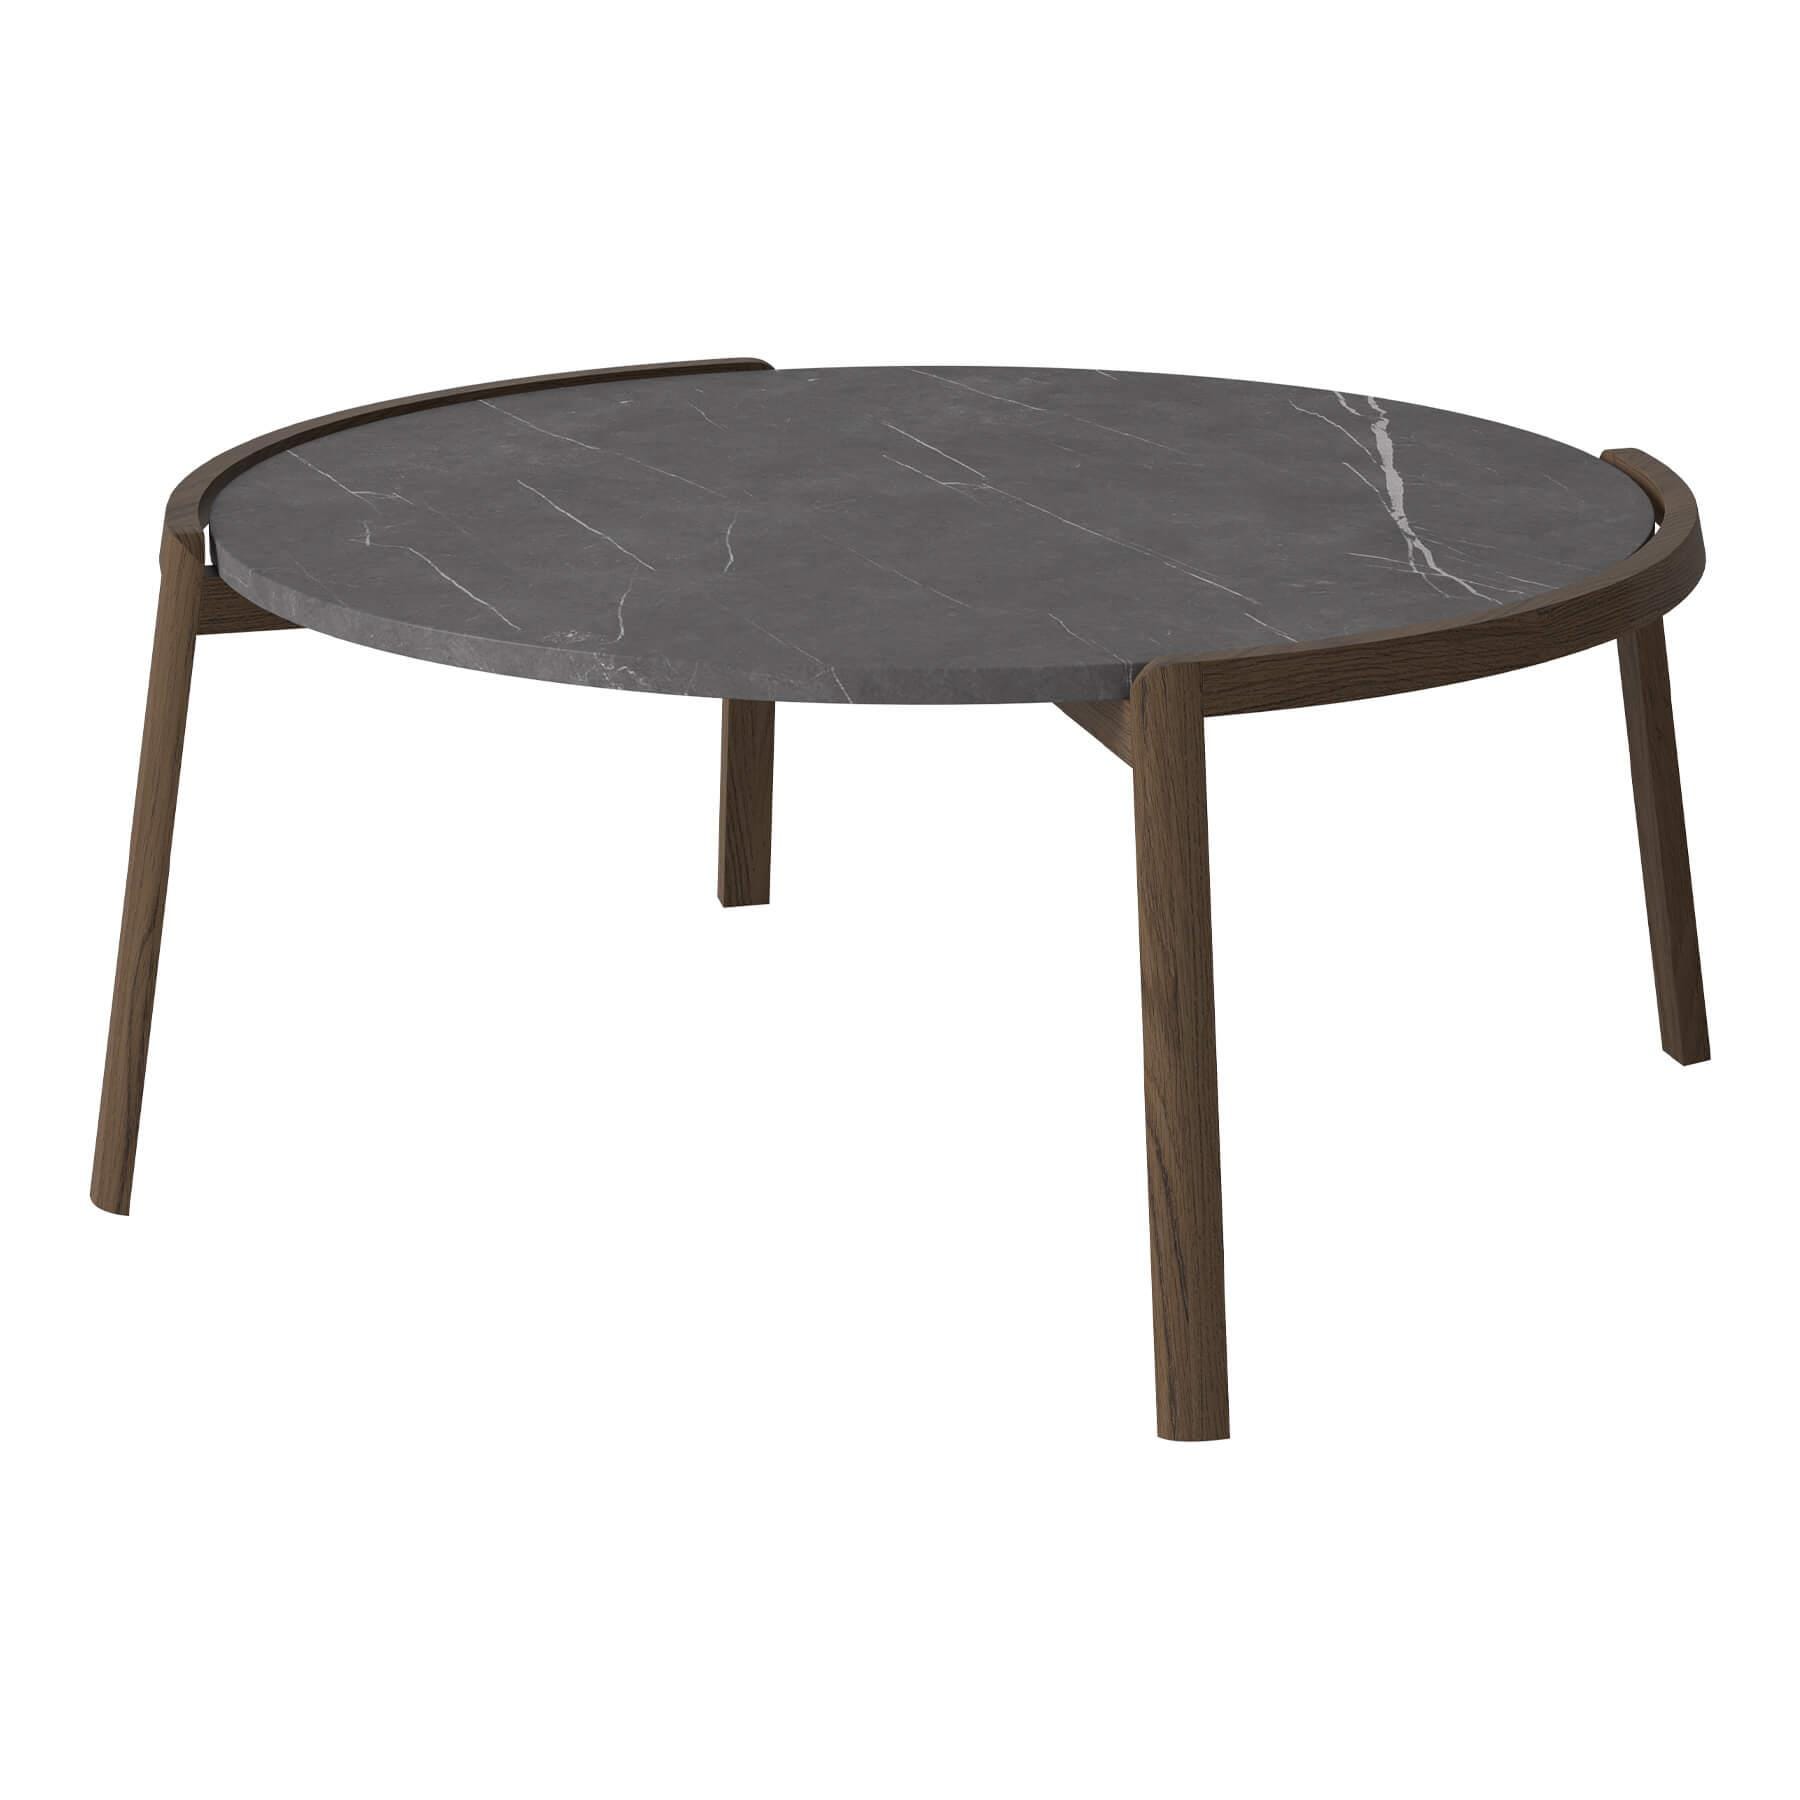 Bolia Mix Coffee Table Large Dark Oiled Legs Pietra Grey Marble Designer Furniture From Holloways Of Ludlow